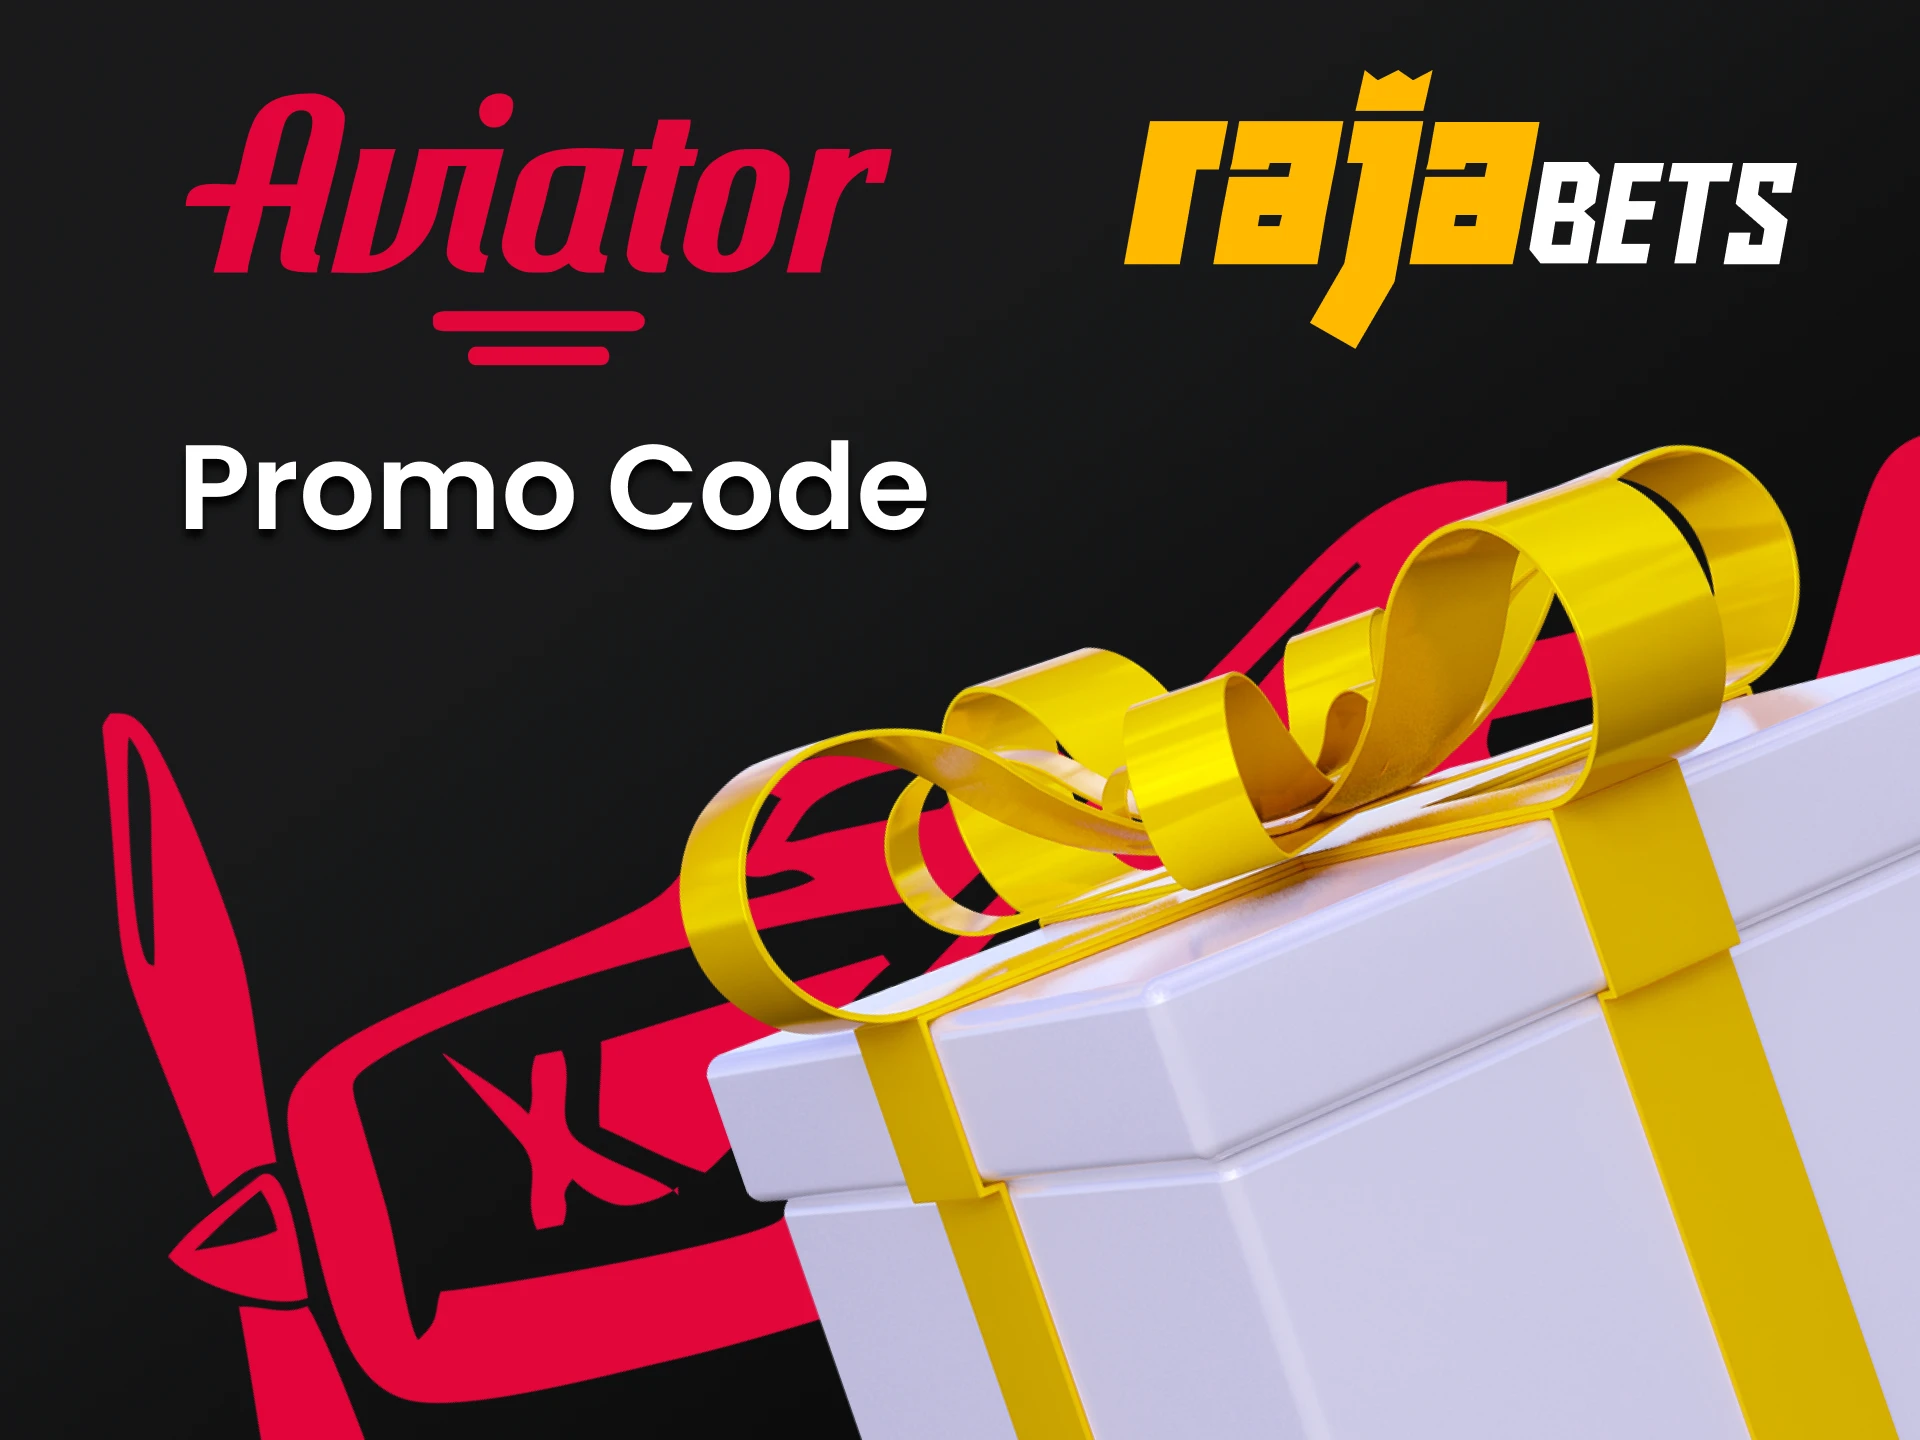 Enter promo code for Aviator from Rajabets.